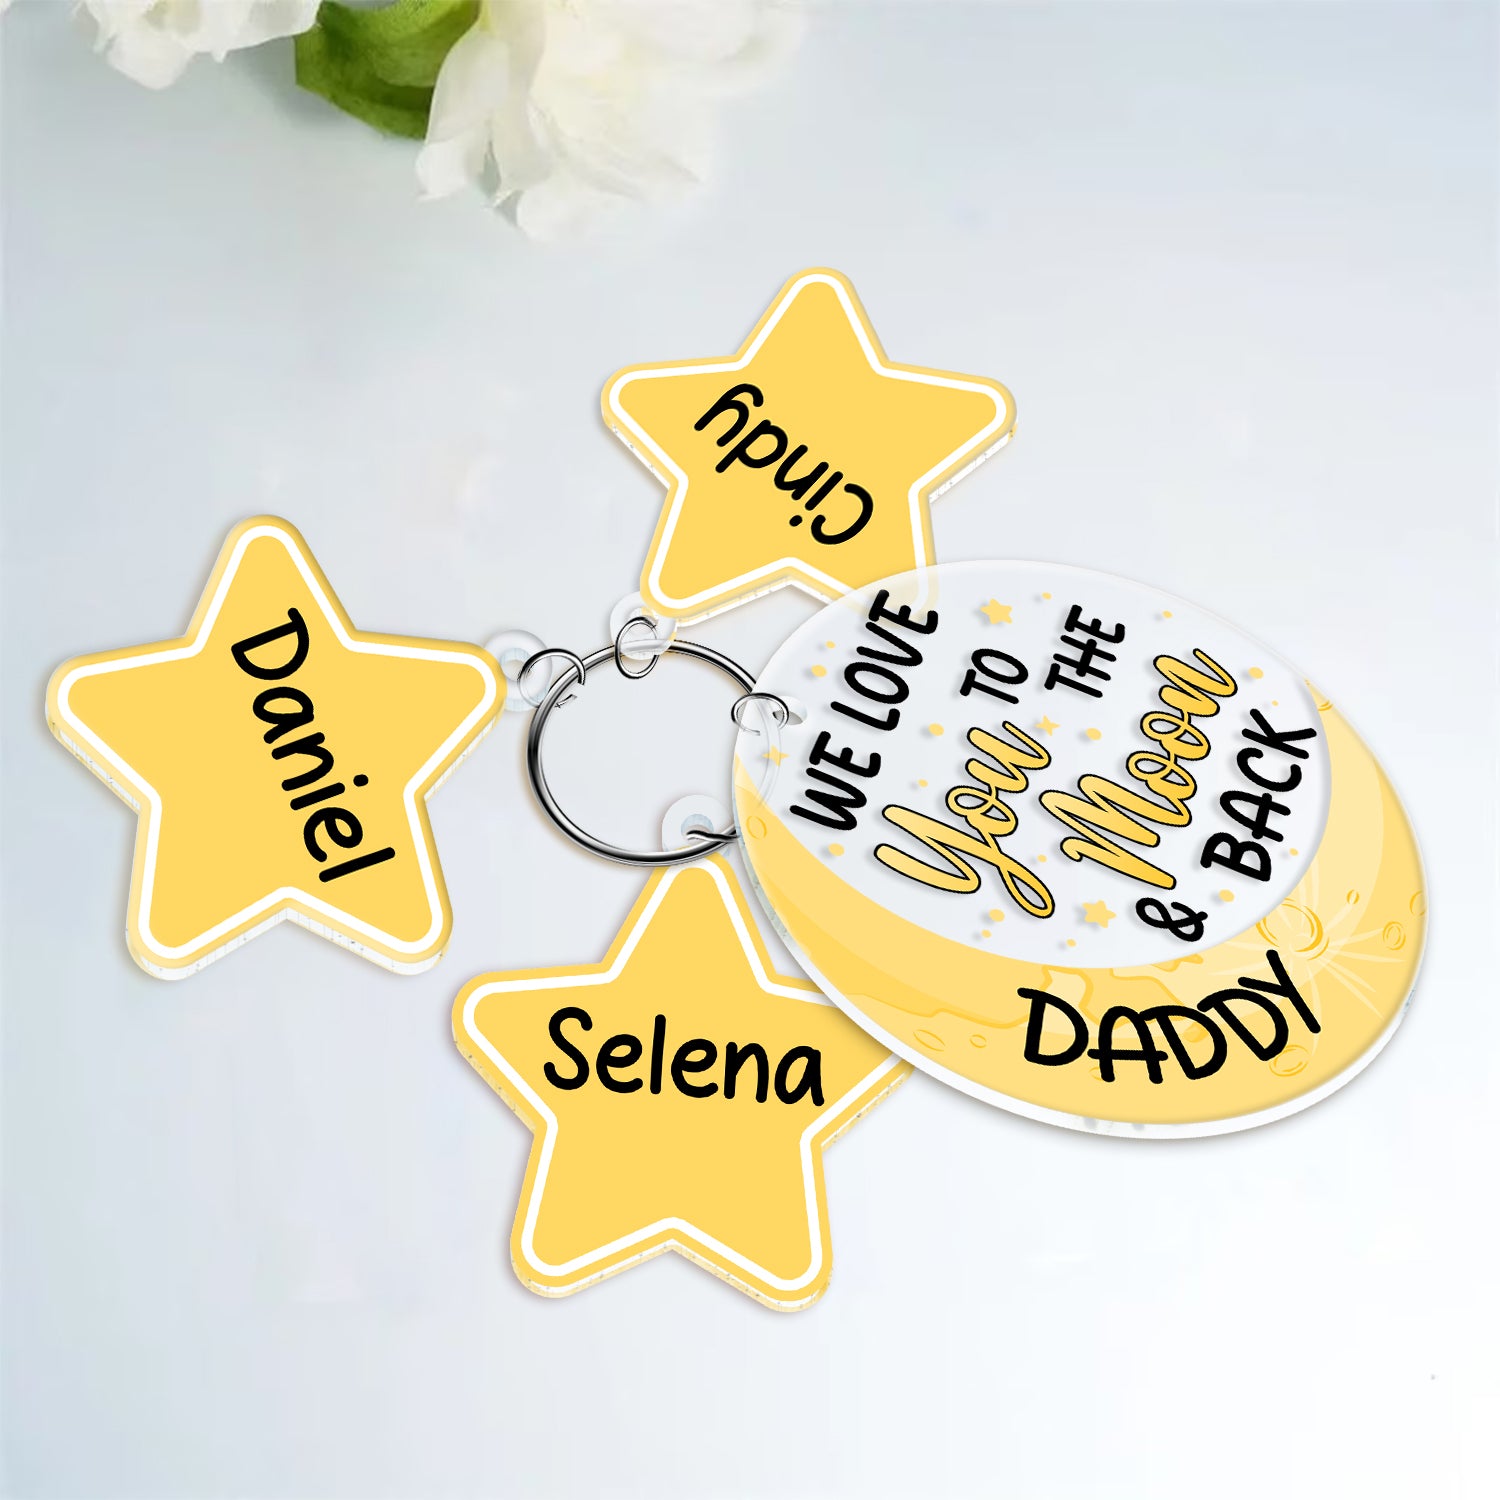 Daddy We Love You To The Moon And Back - Personalized Acrylic Tag Keychain